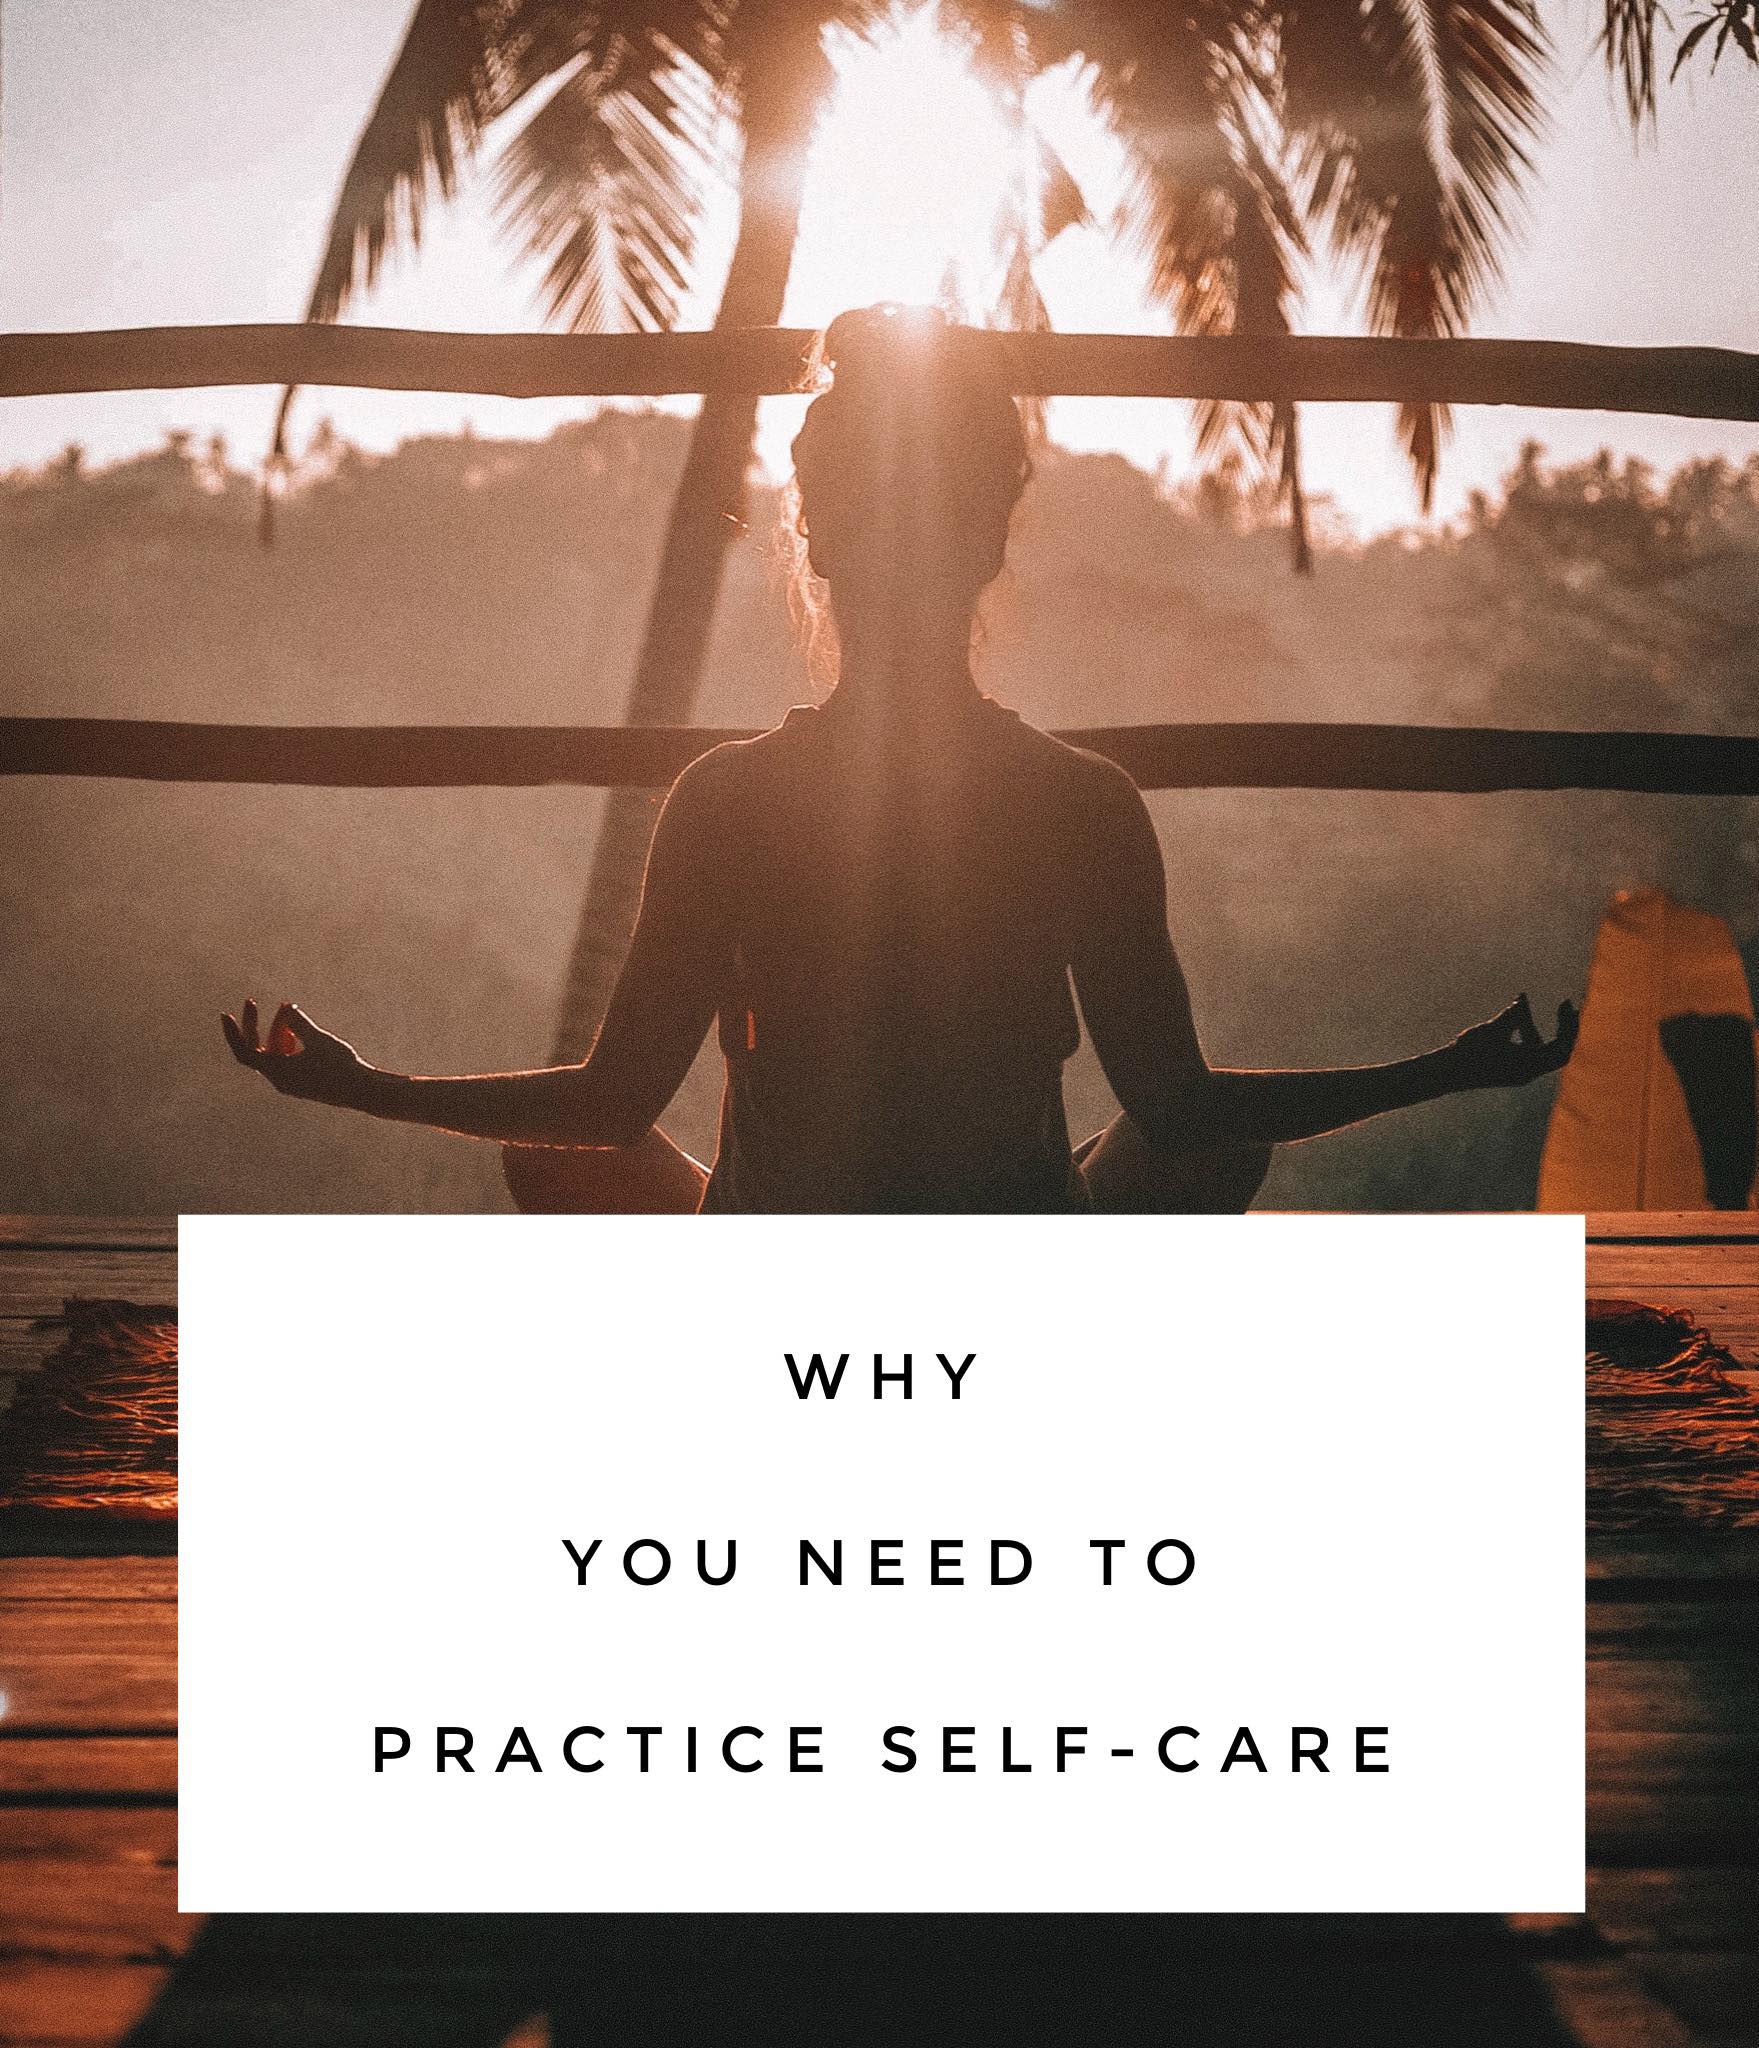 Why You Need to Practice Self-Care